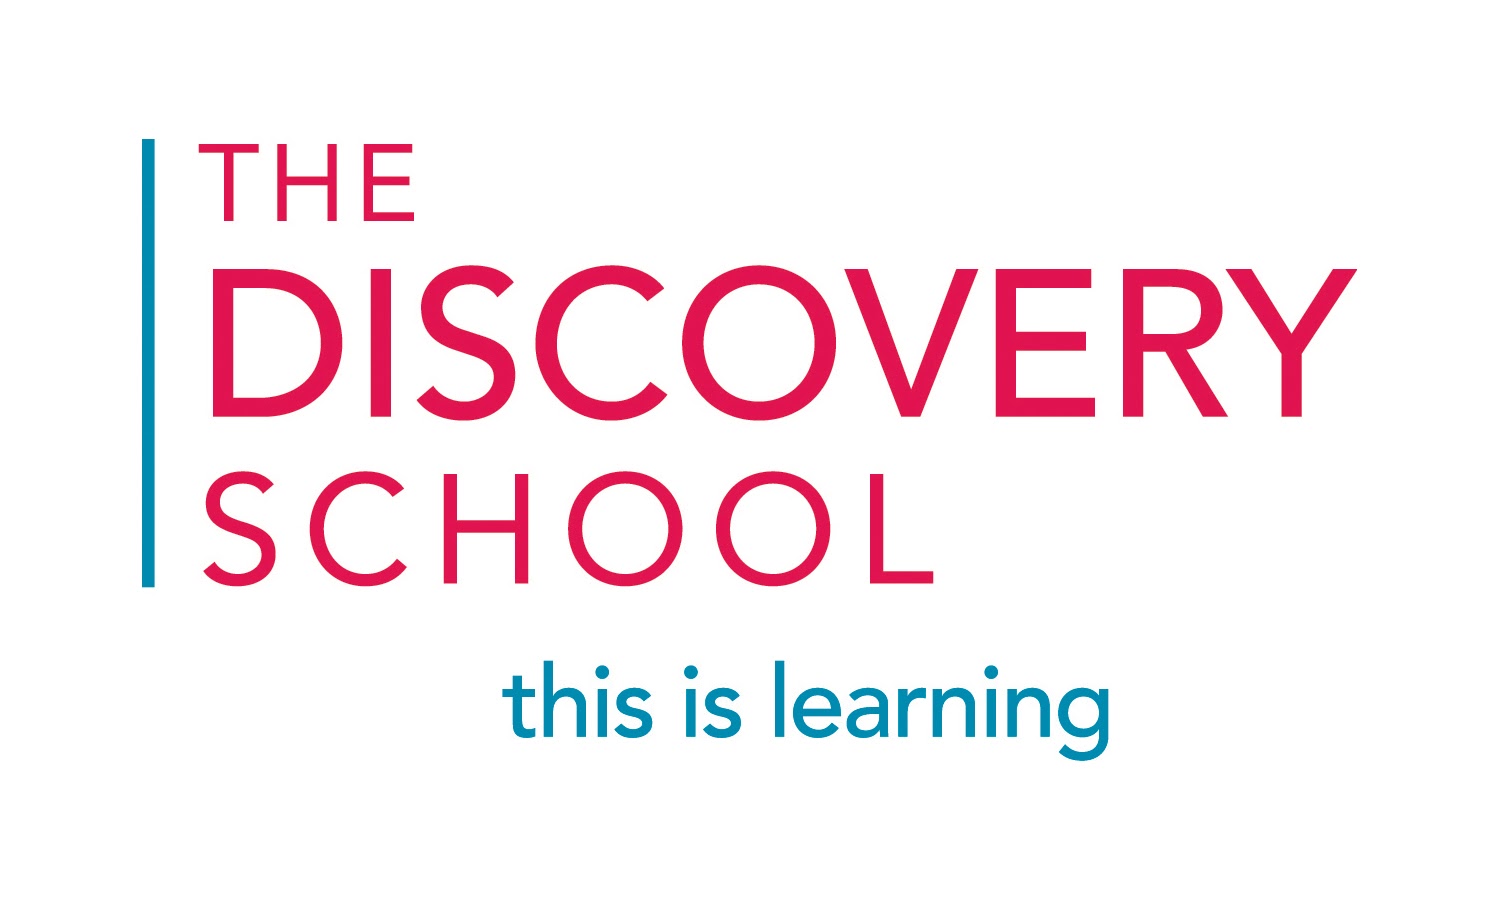 The Discovery School